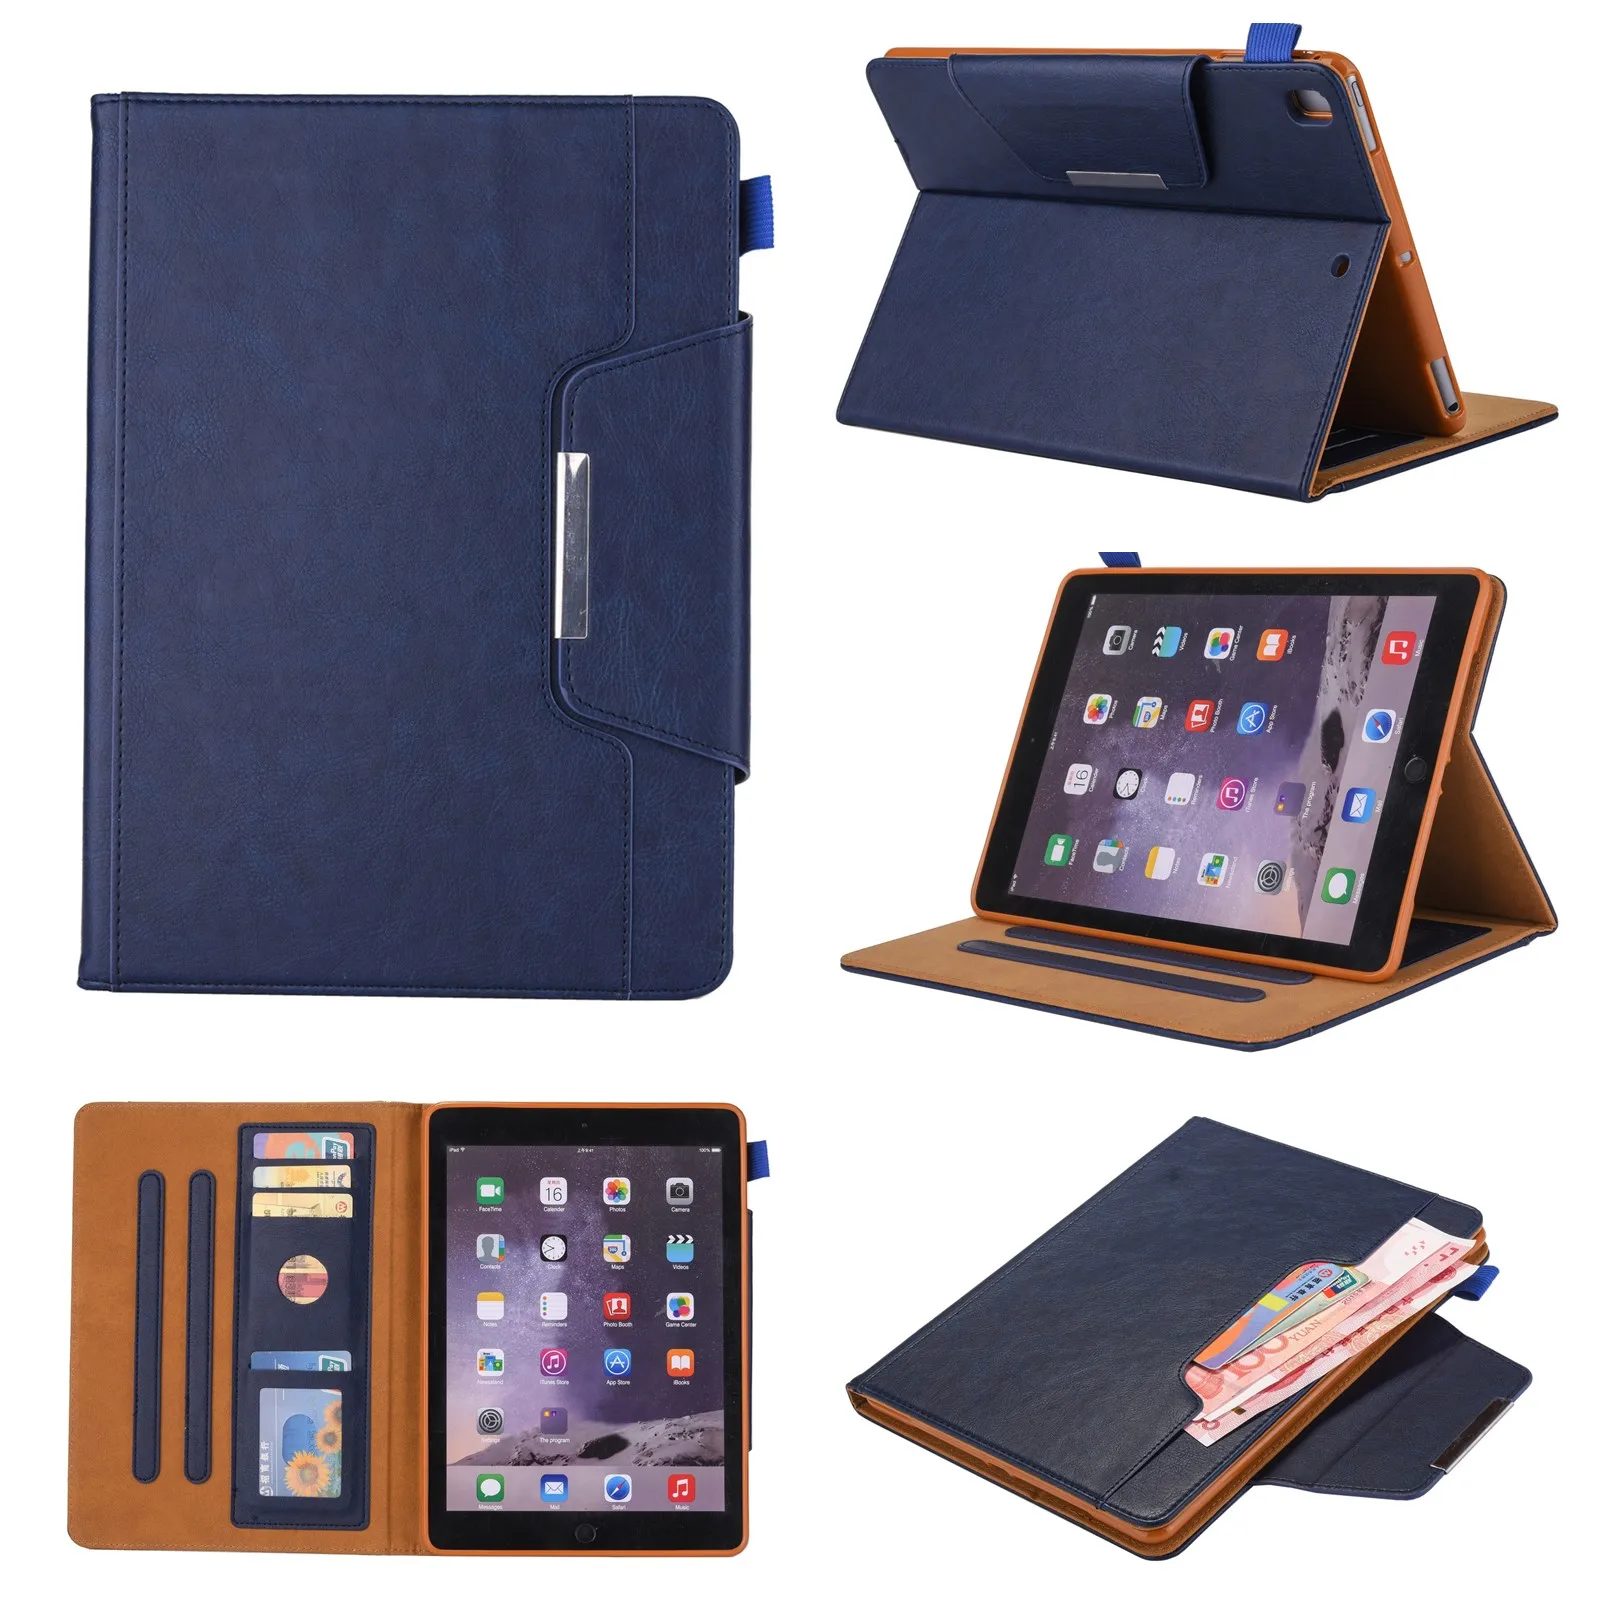 

Case for Apple iPad Pro 11 Pro 12.9 2018 2017 High Quality Smart Sleep Wake UP Cover for iPad 9.7 A1893 A1954 A1822 A1823 + Flim